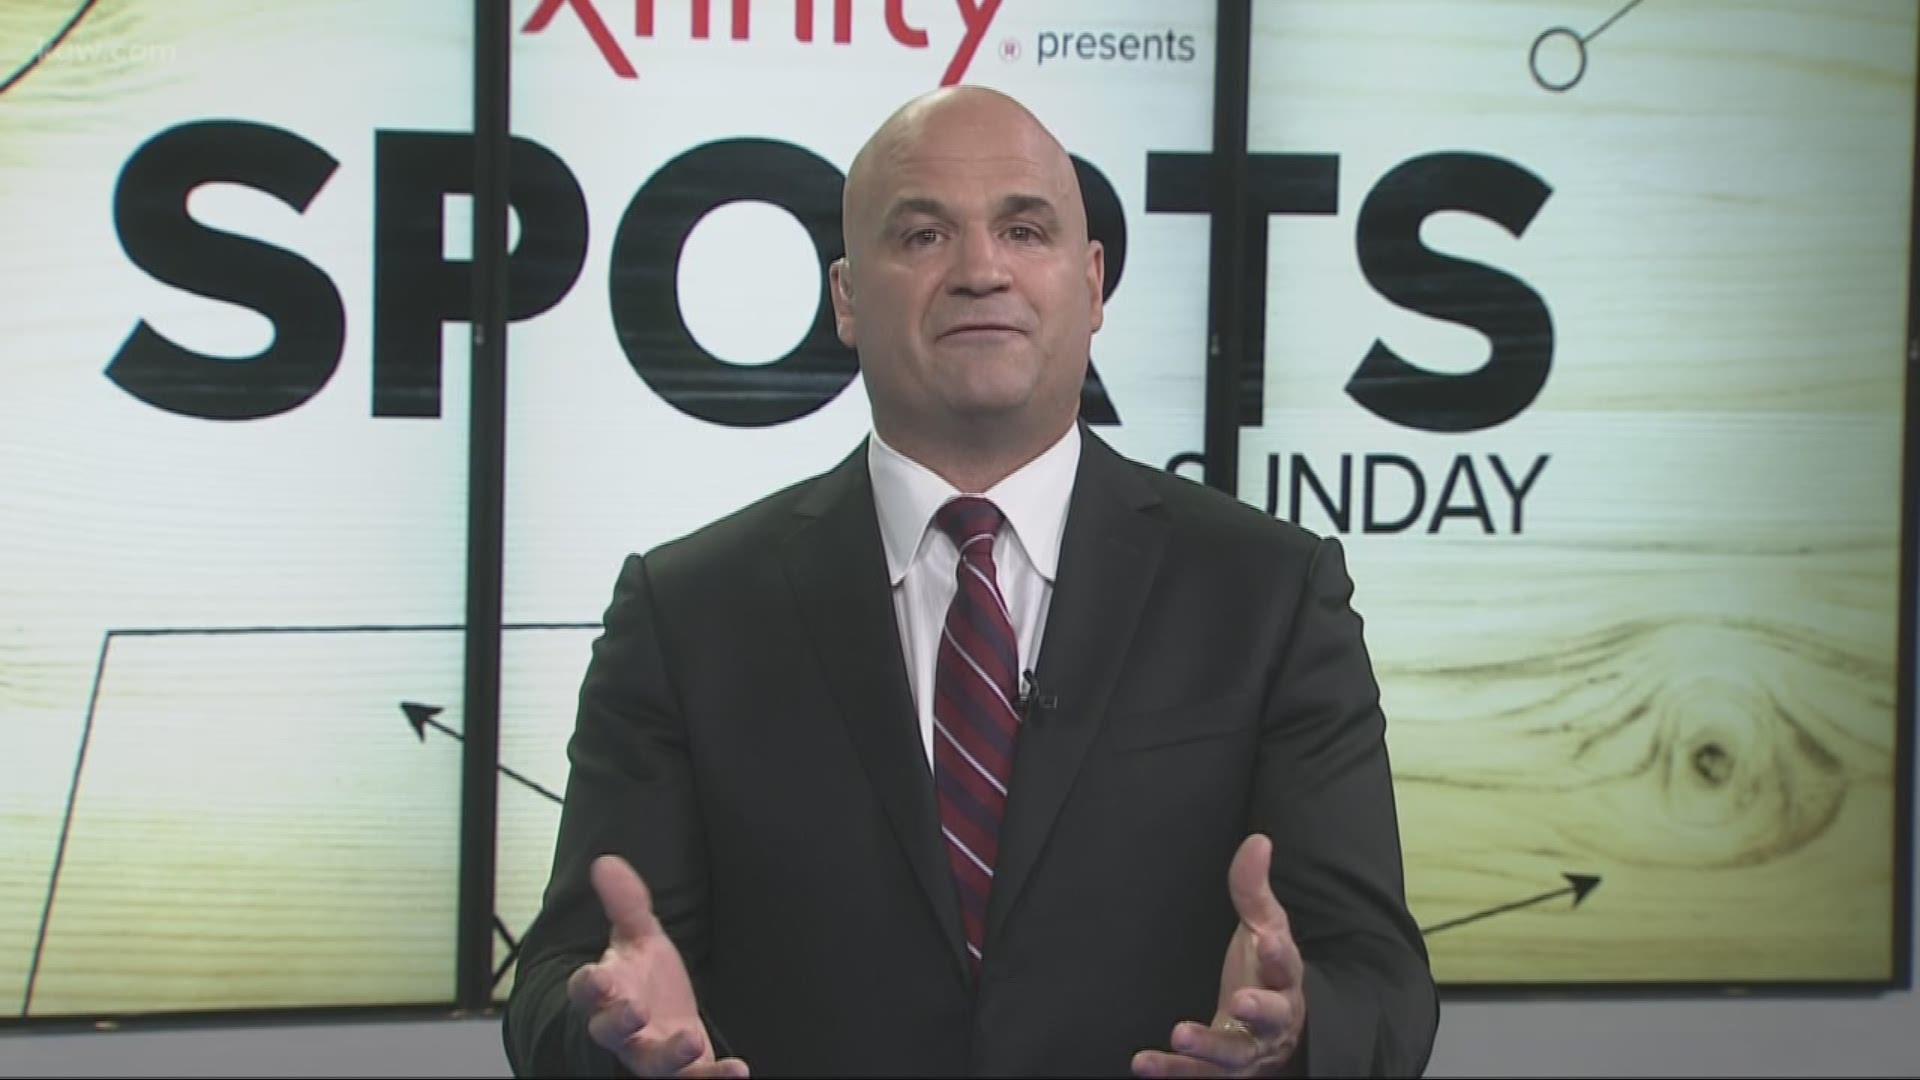 KGW contributor John Canzano and KGW's Orlando Sanchez talk about the reasons the Trail Blazers let Ed Davis walk in free agency, and about what awaits the Blazers this offseason.